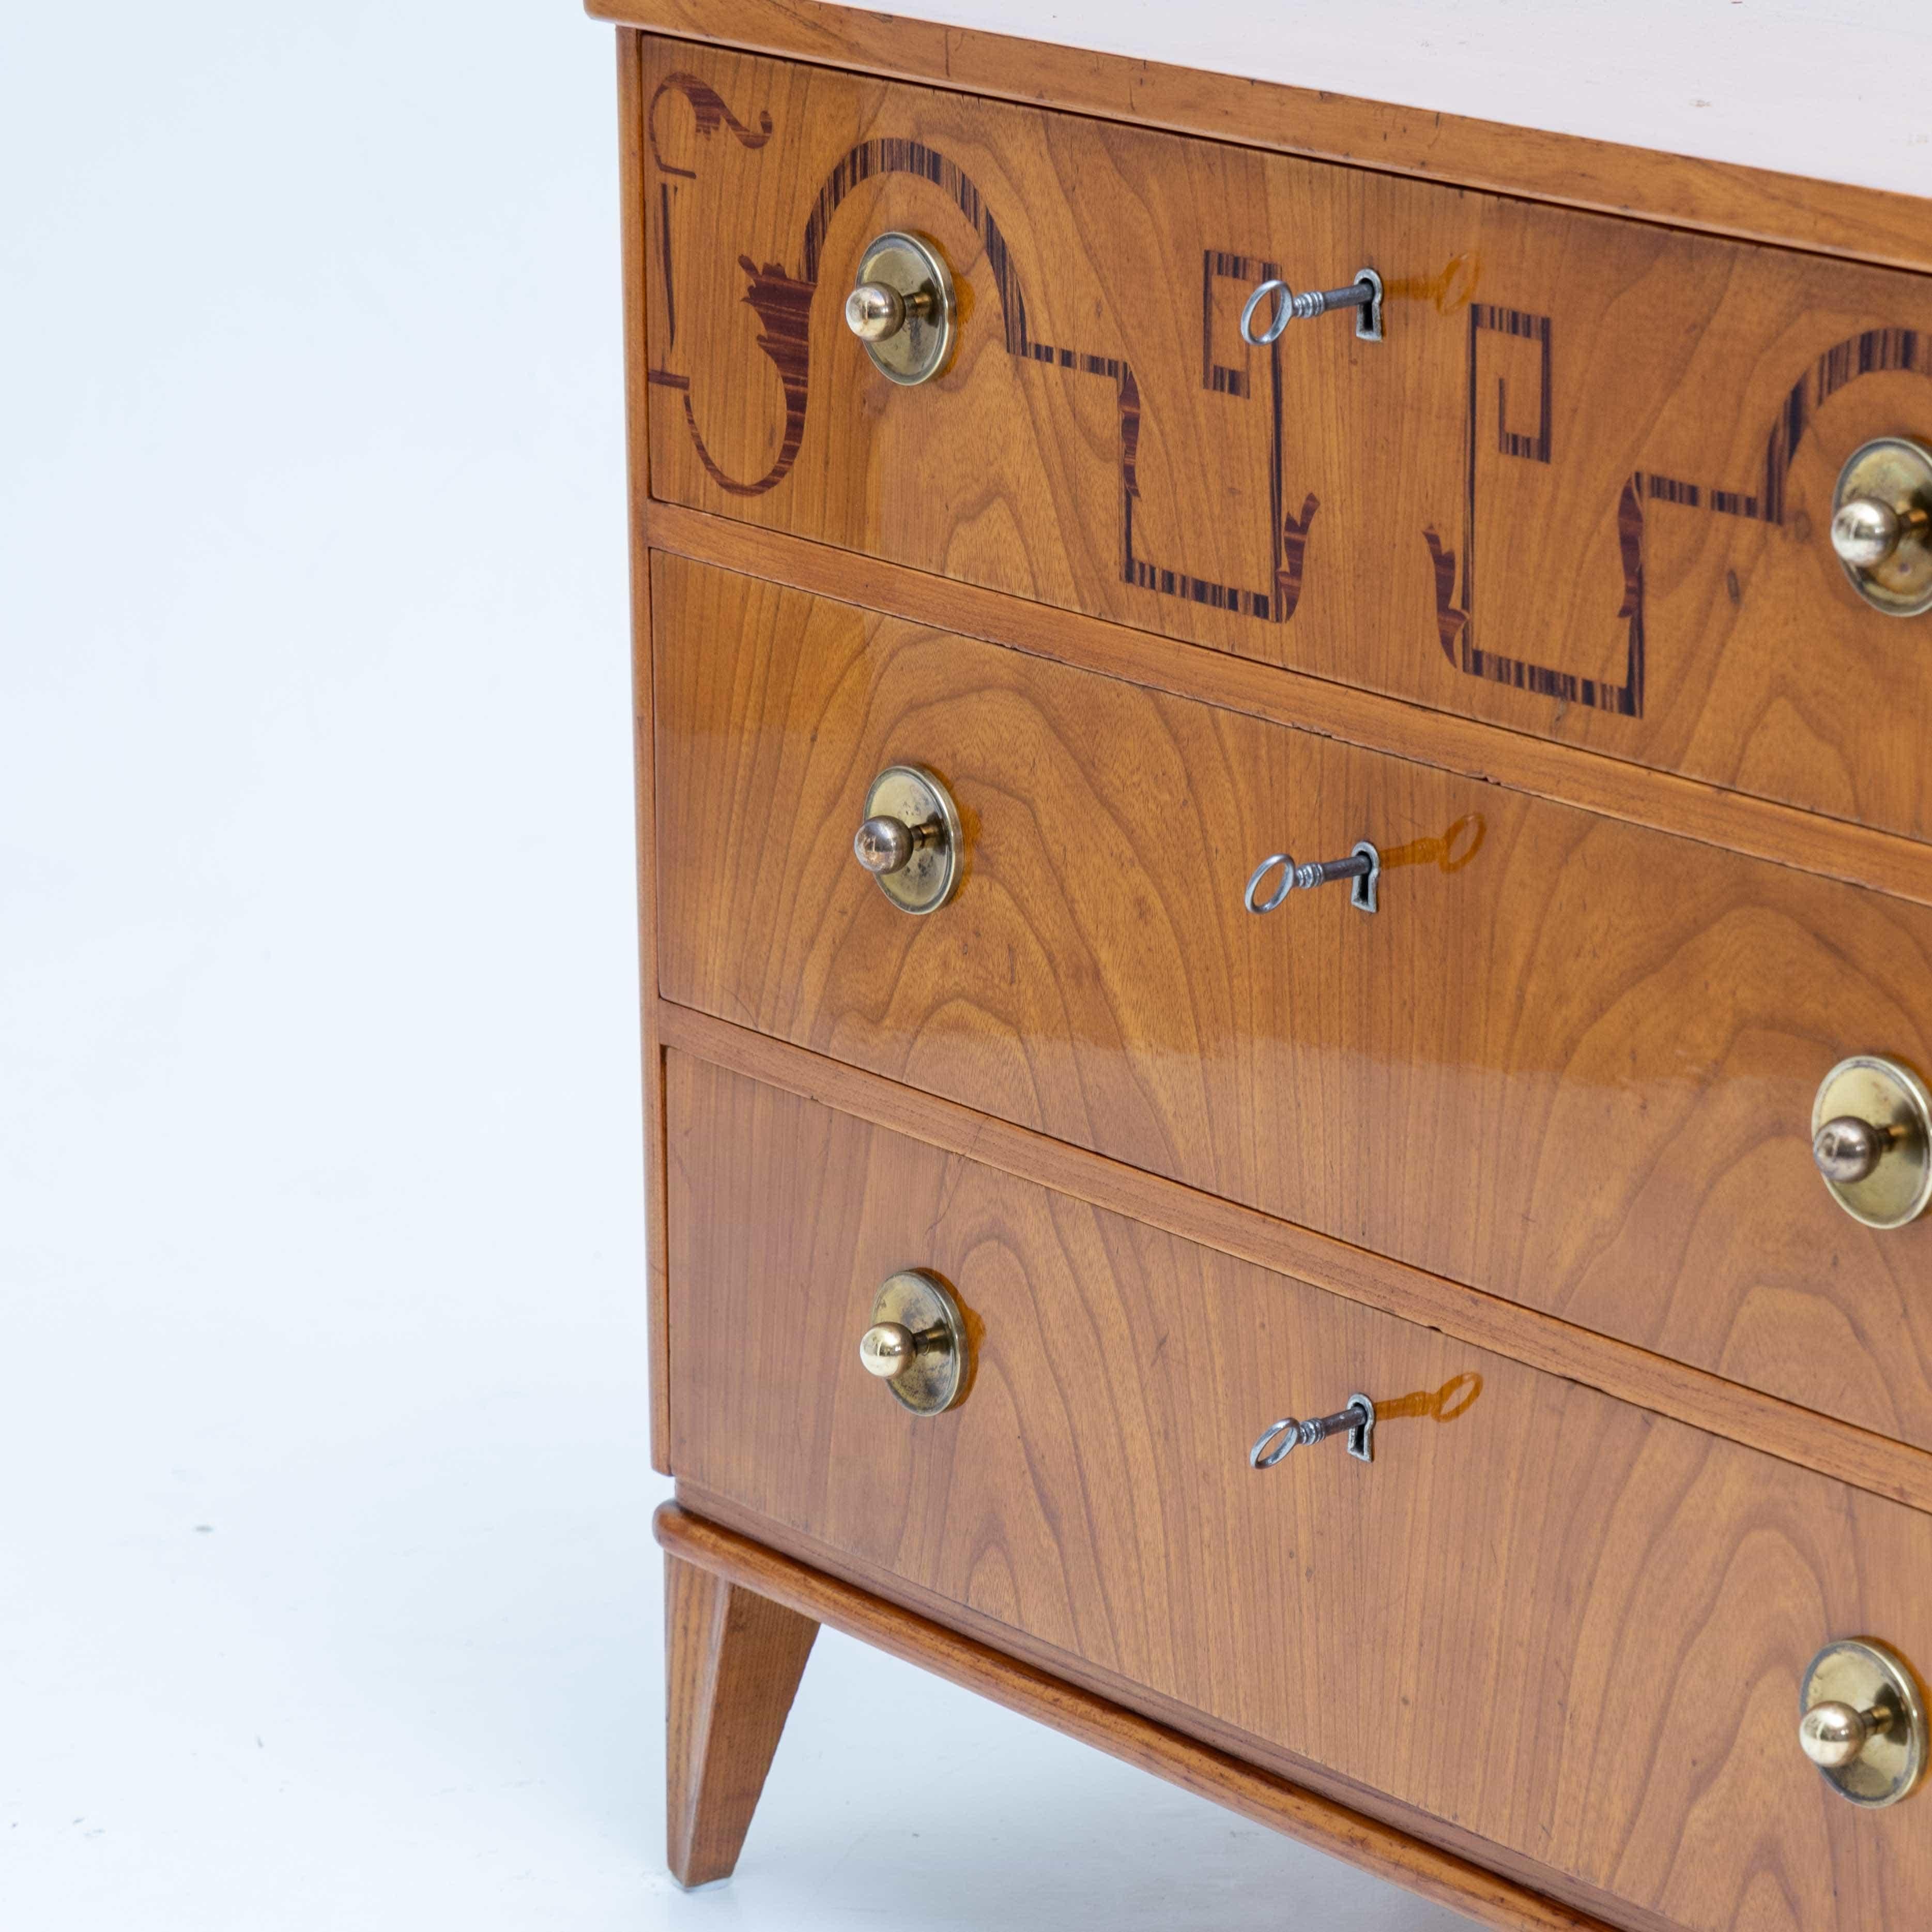 Small Art Deco chest of drawers with brass knobs and three drawers. The top drawer is decorated with inlays.